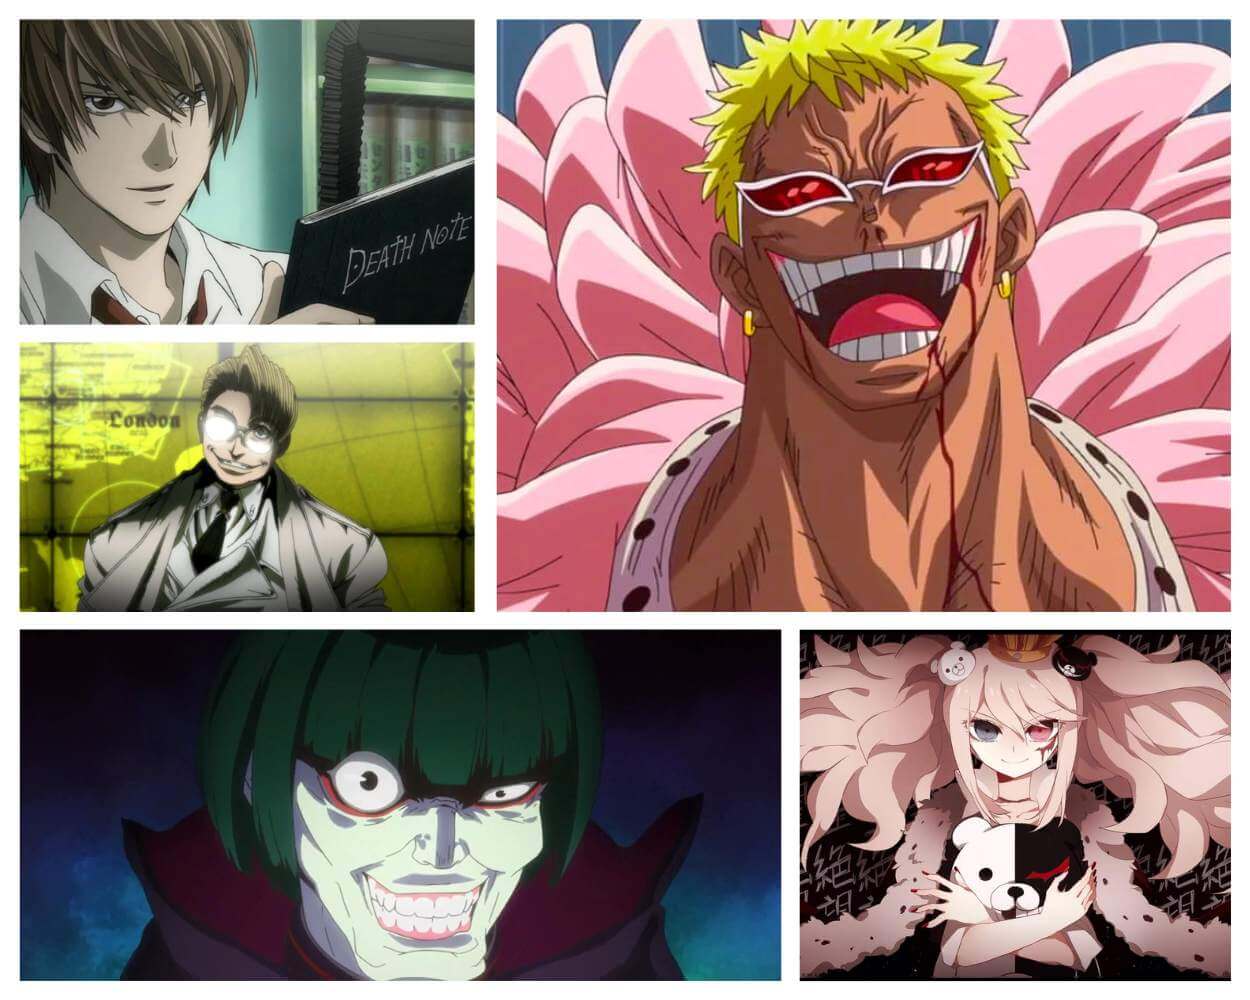 20 Anime Villains That Will Give You Nightmares